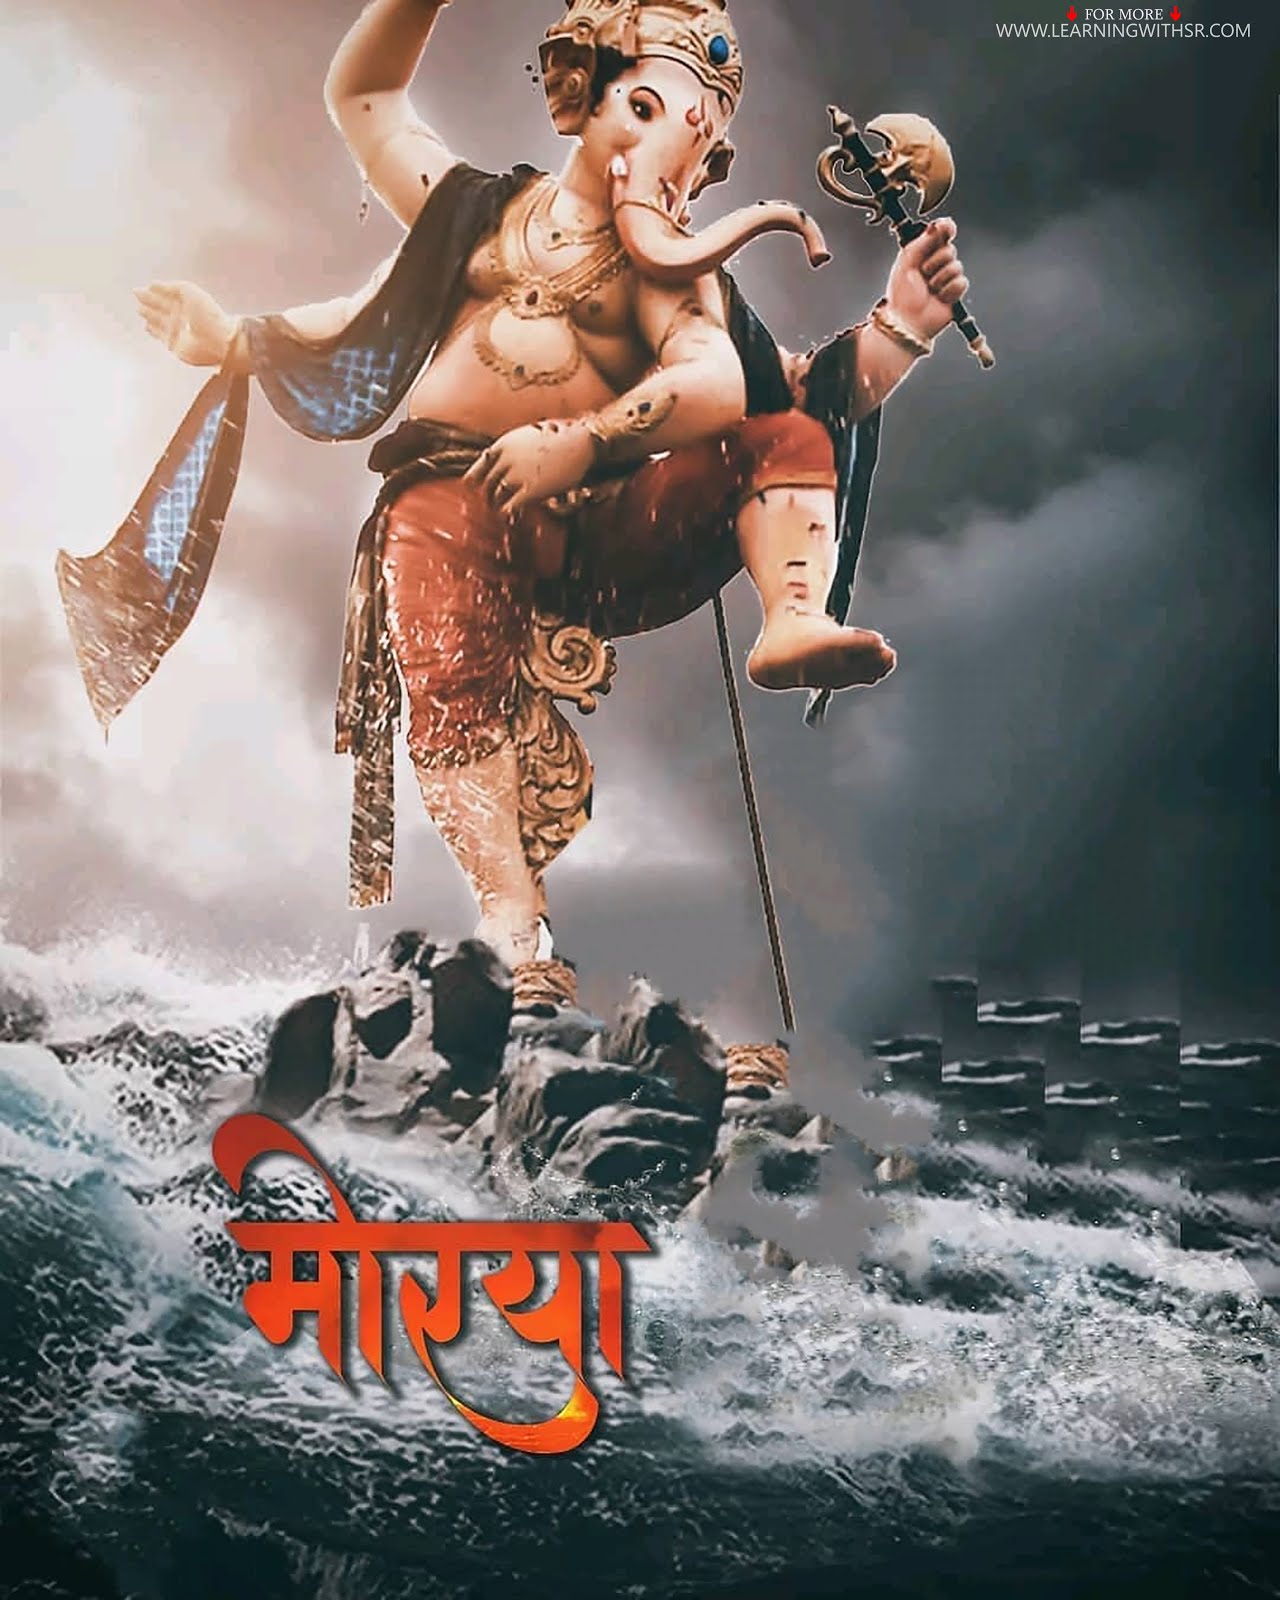 Mahakal background download for photo editing, Mahadev cb background  download 2019 - LEARNINGWITHSR